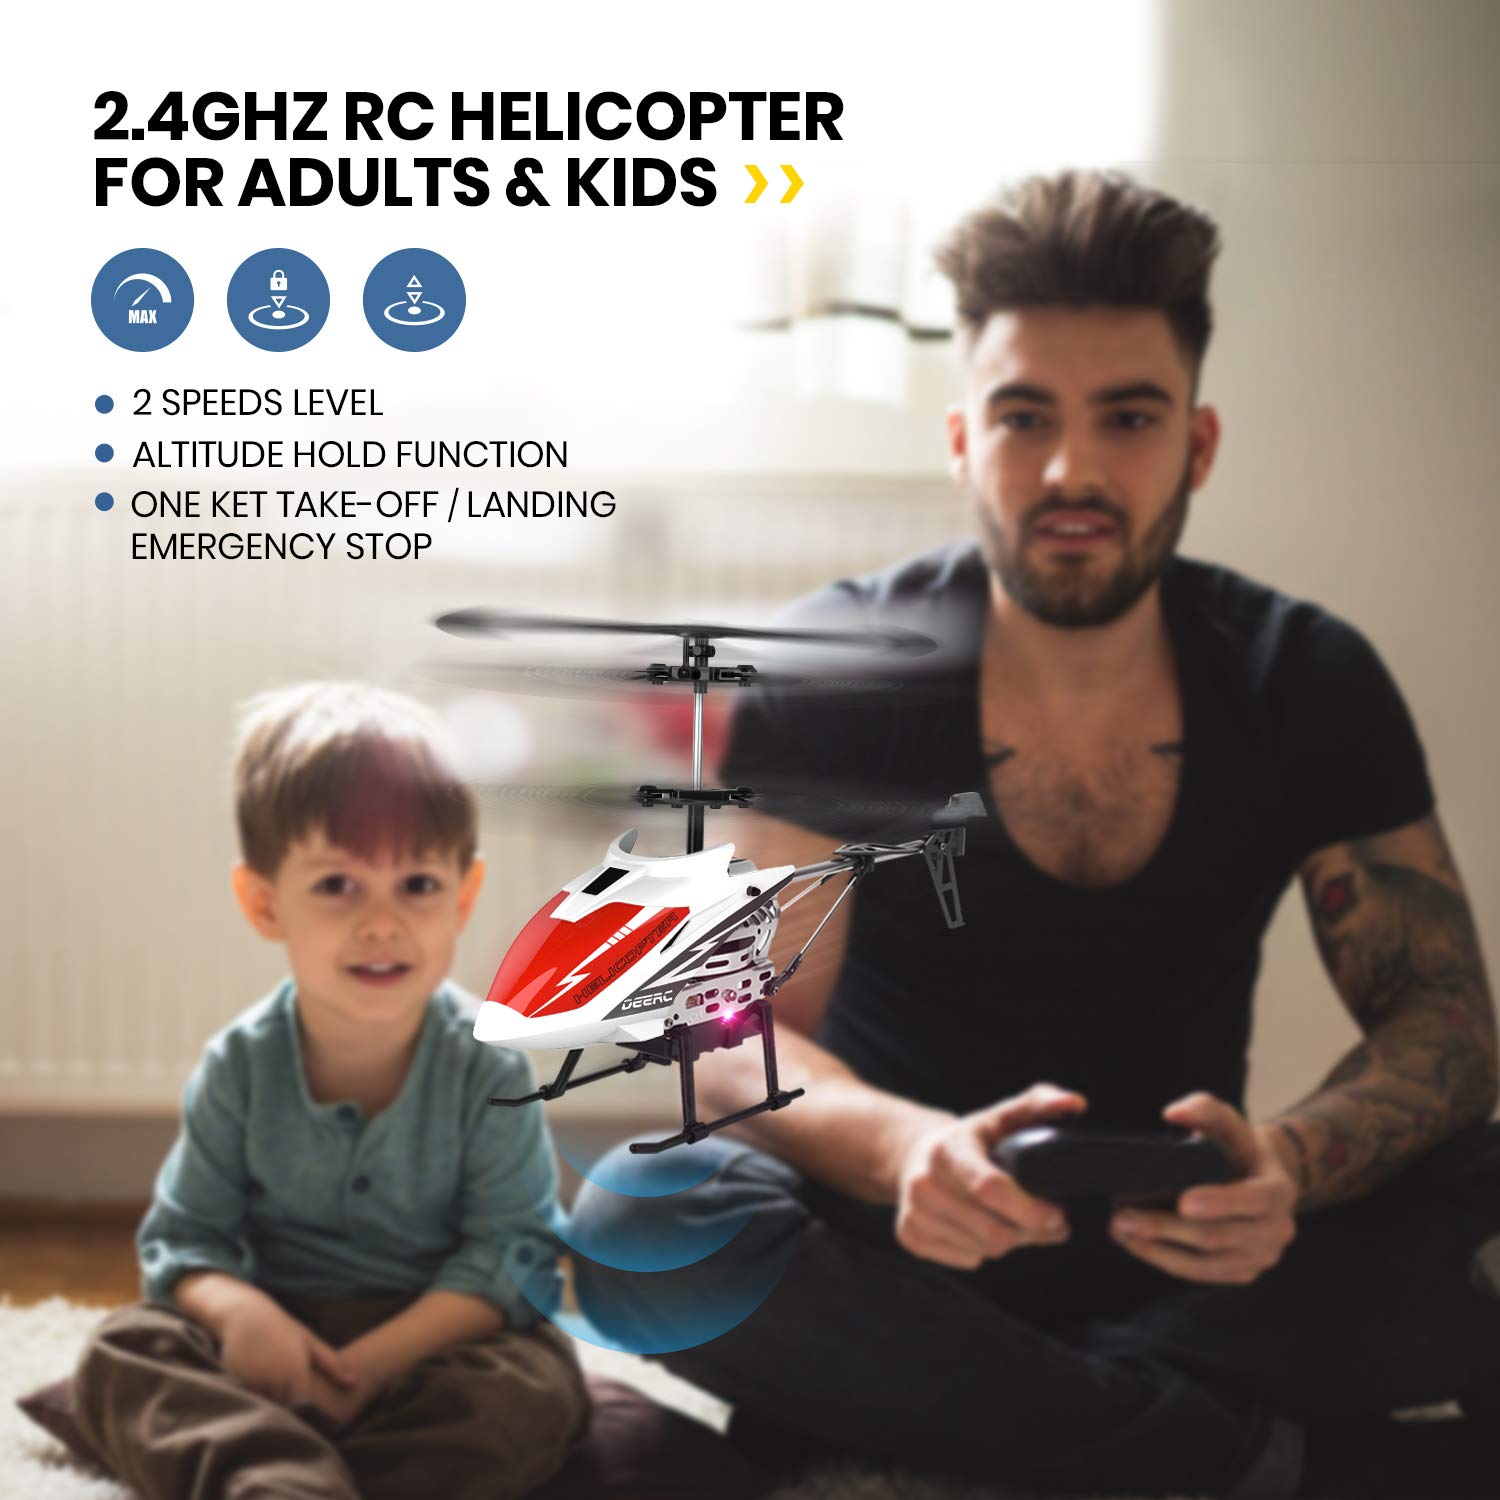 DEERC DE51 Remote Control Helicopter Altitude Hold RC Helicopters with Gyro for Adult Kid Beginner,2.4GHz Aircraft Indoor Flying Toy with 3.5 Channel,High&Low Speed,LED Light,2 Battery for 20 Min Play